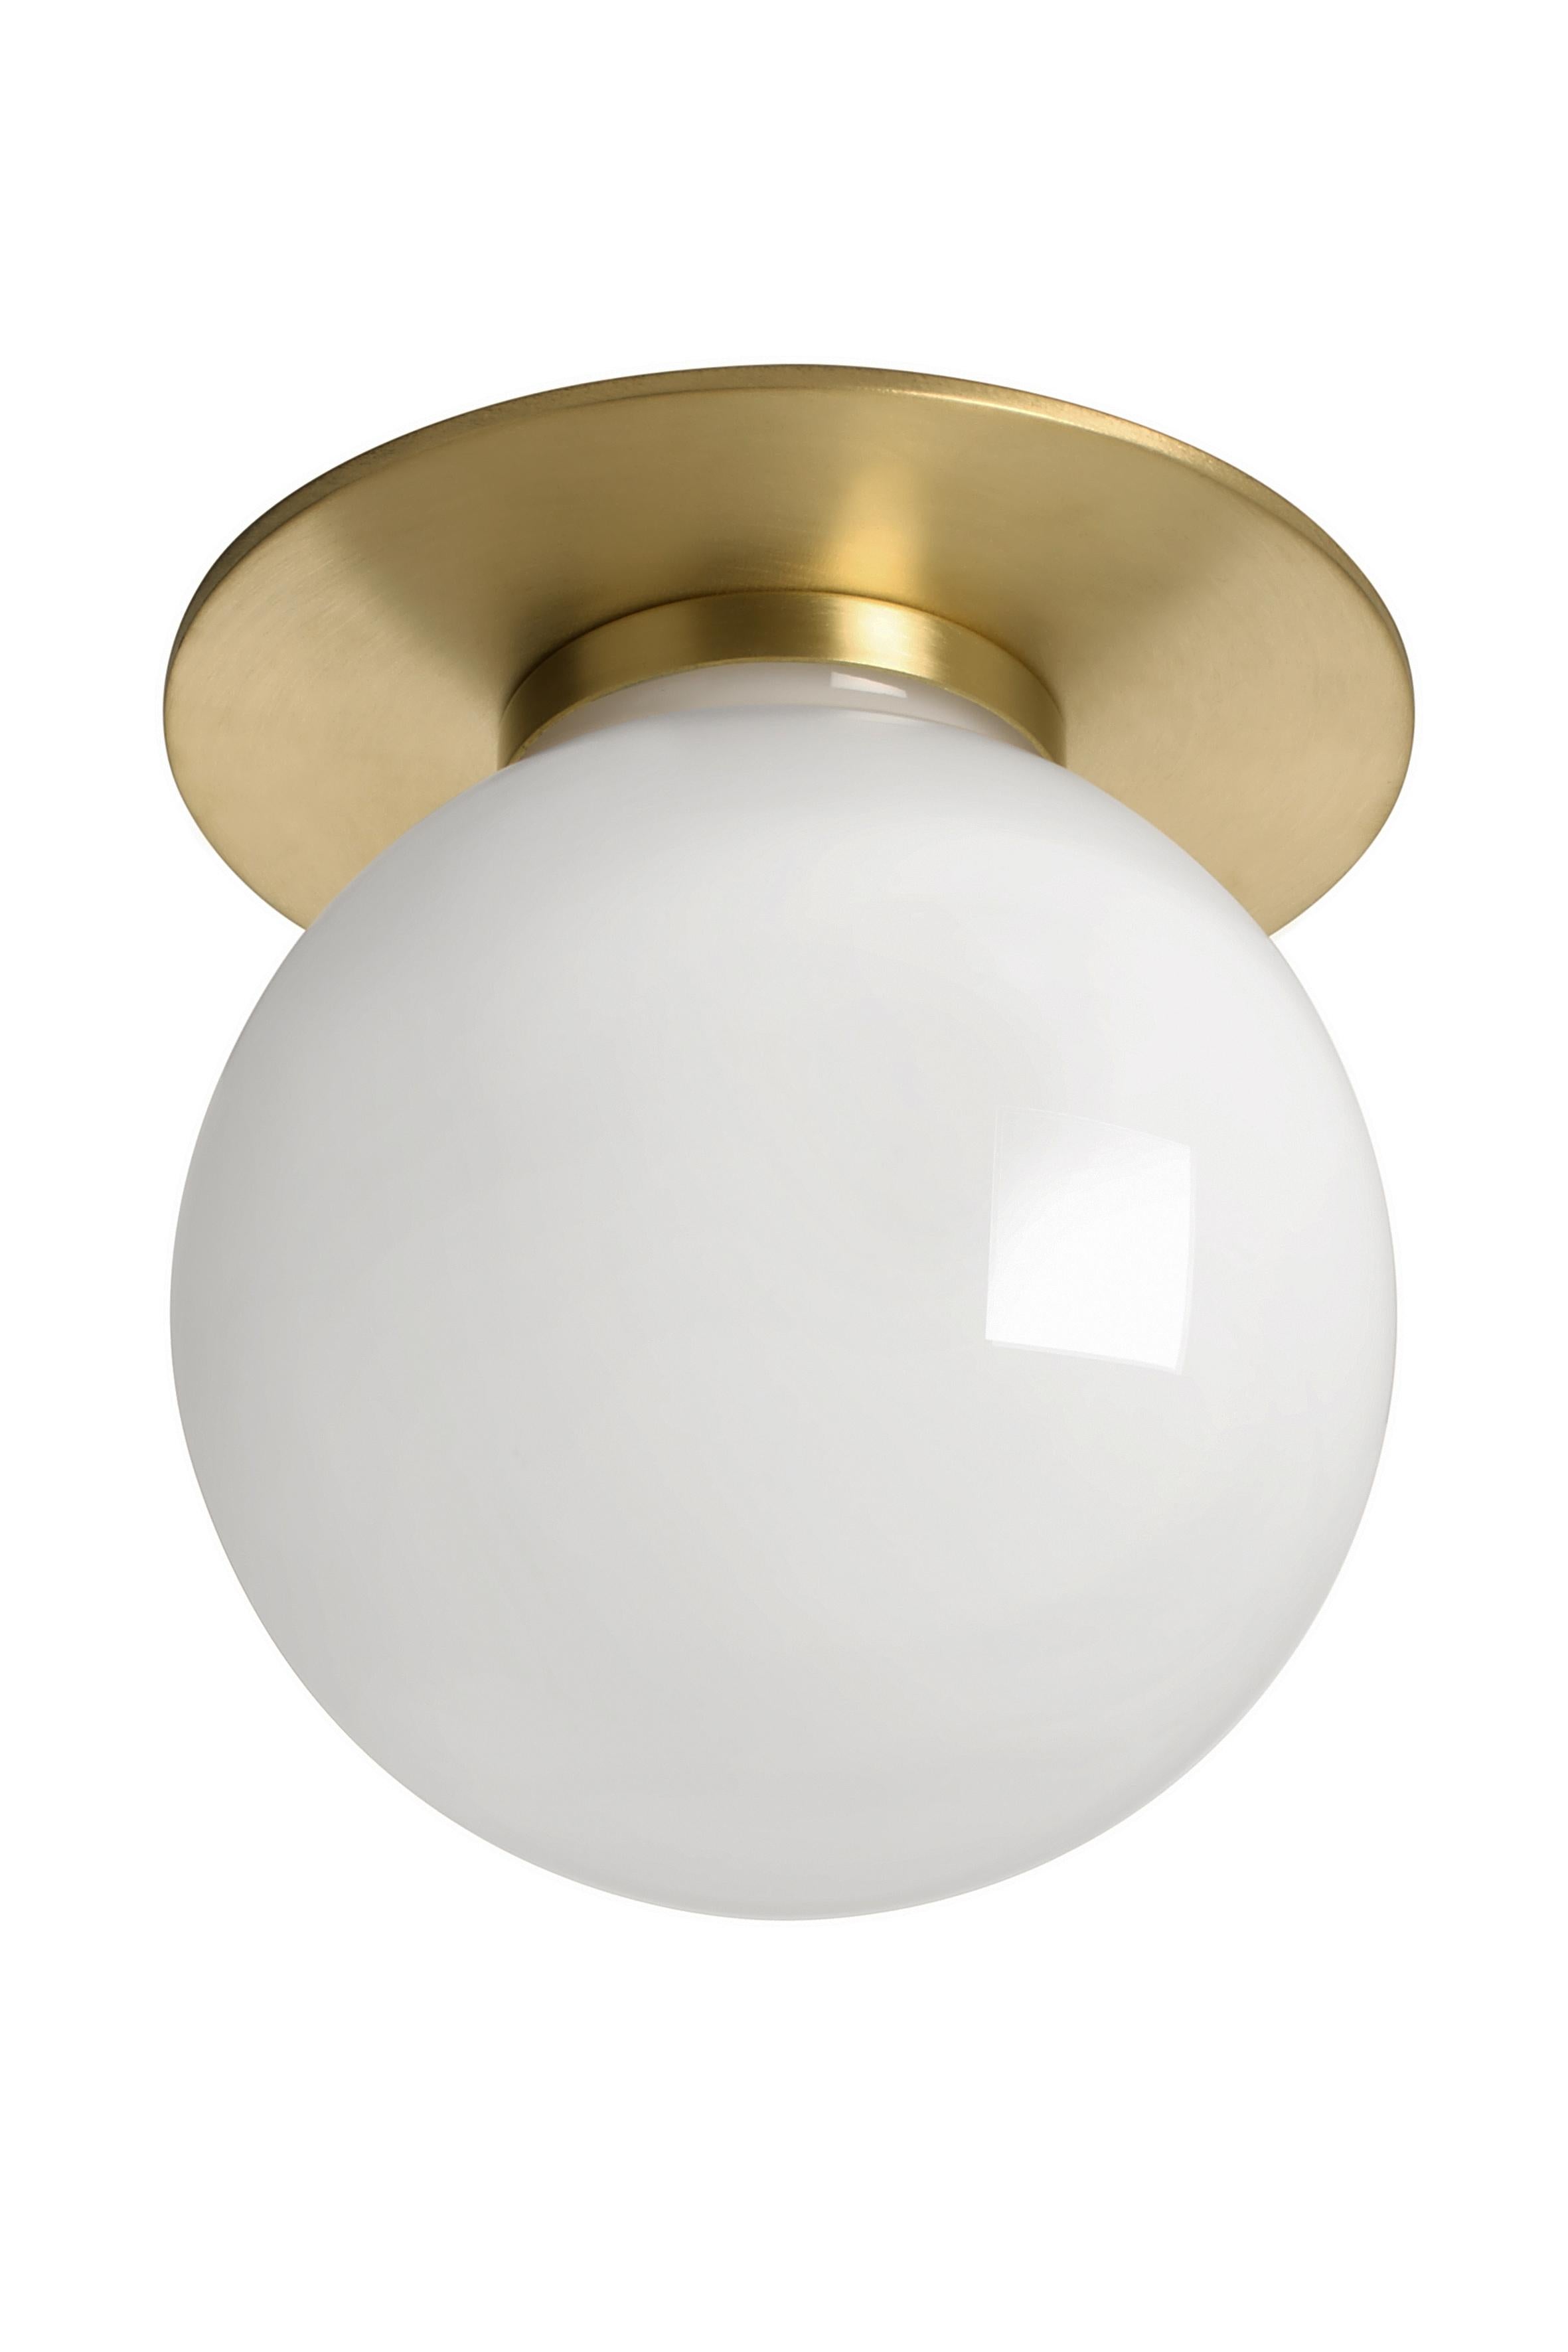 Mezzolarge flush lamp by CTO lighting
Materials: satin brass with opal glass shade.
Also available in polished nickel with opal glass shade.
Dimensions: H 19 x W 18 cm 

All our lamps can be wired according to each country. If sold to the USA